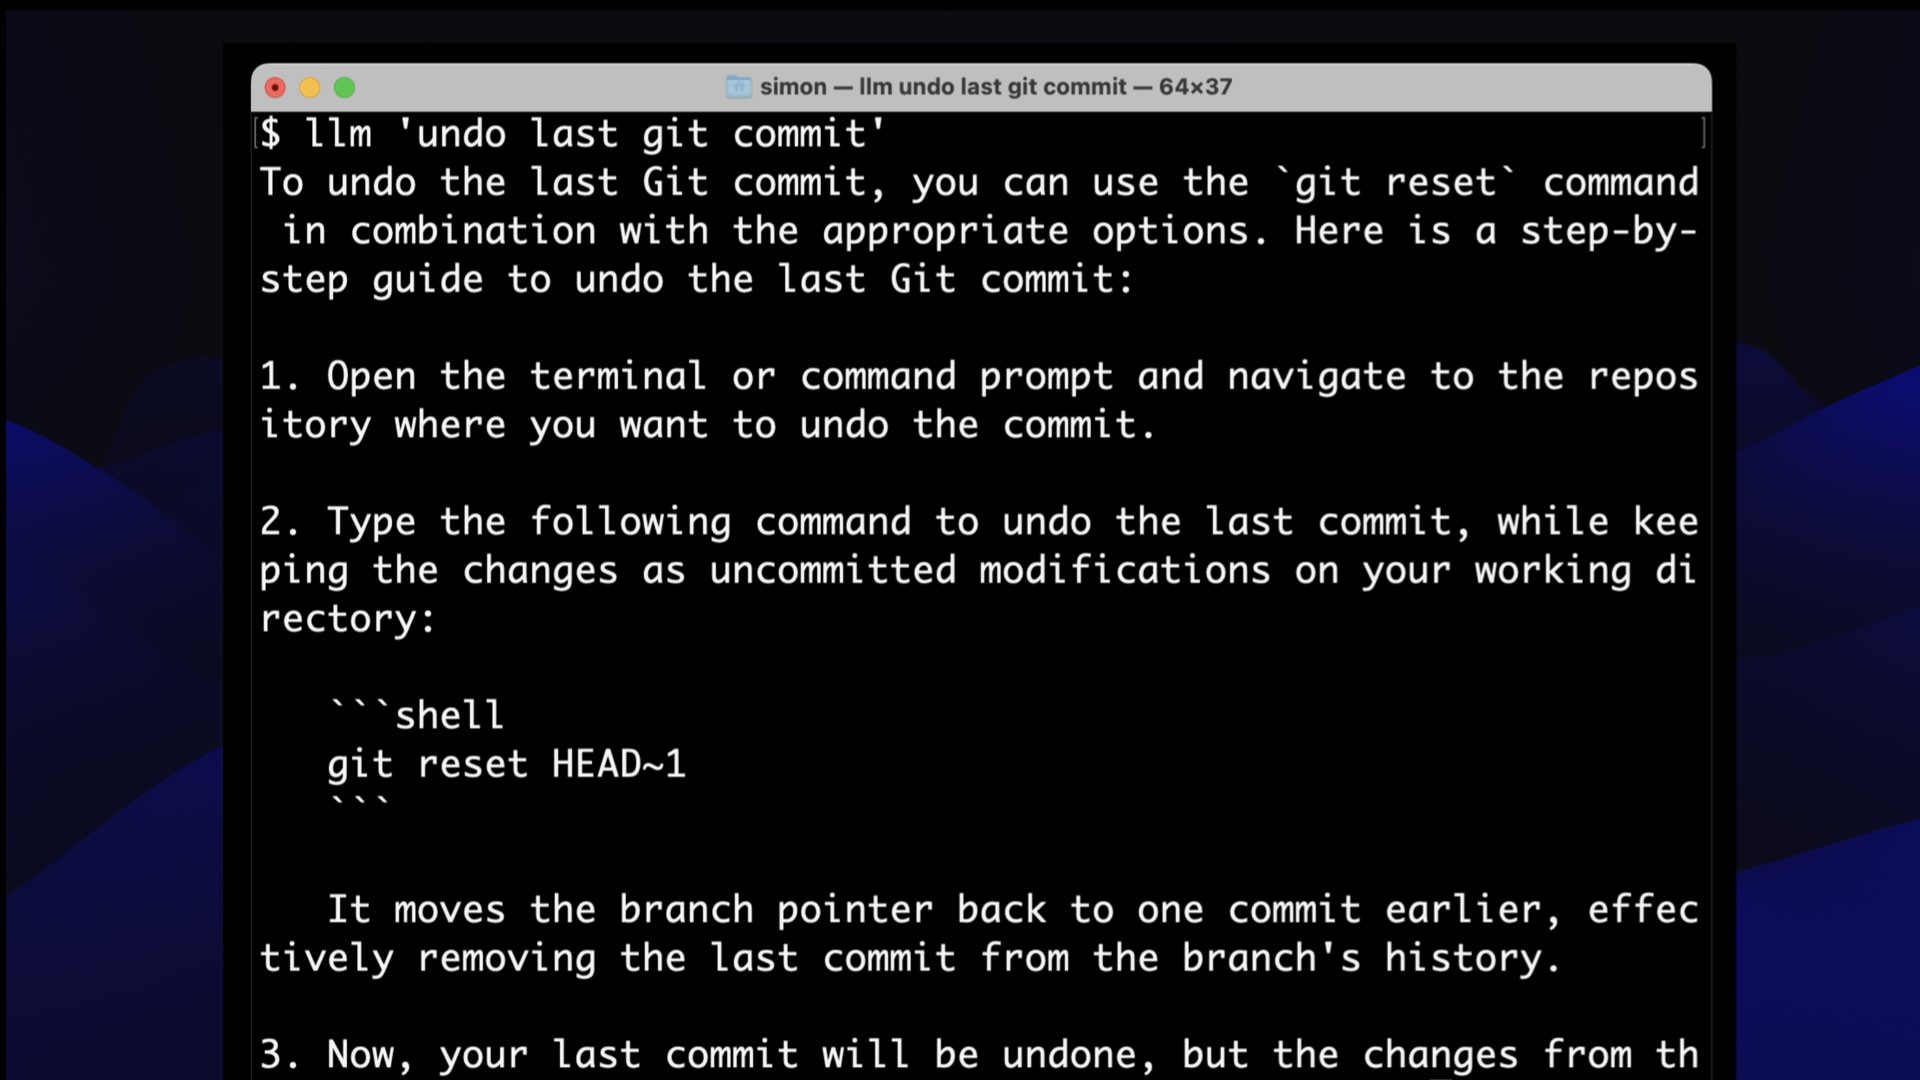 $ 1lm 'undo last git commit’  To undo the last Git commit, you can use the "git reset" command in combination with the appropriate options. Here is a step-by- step guide to undo the last Git commit: 1. Open the terminal or command prompt and navigate to the repository where you want to undo the commit. 2. Type the following command to undo the last commit, while keeping the changes as uncommitted modifications on your working directory:  git reset HEAD~1